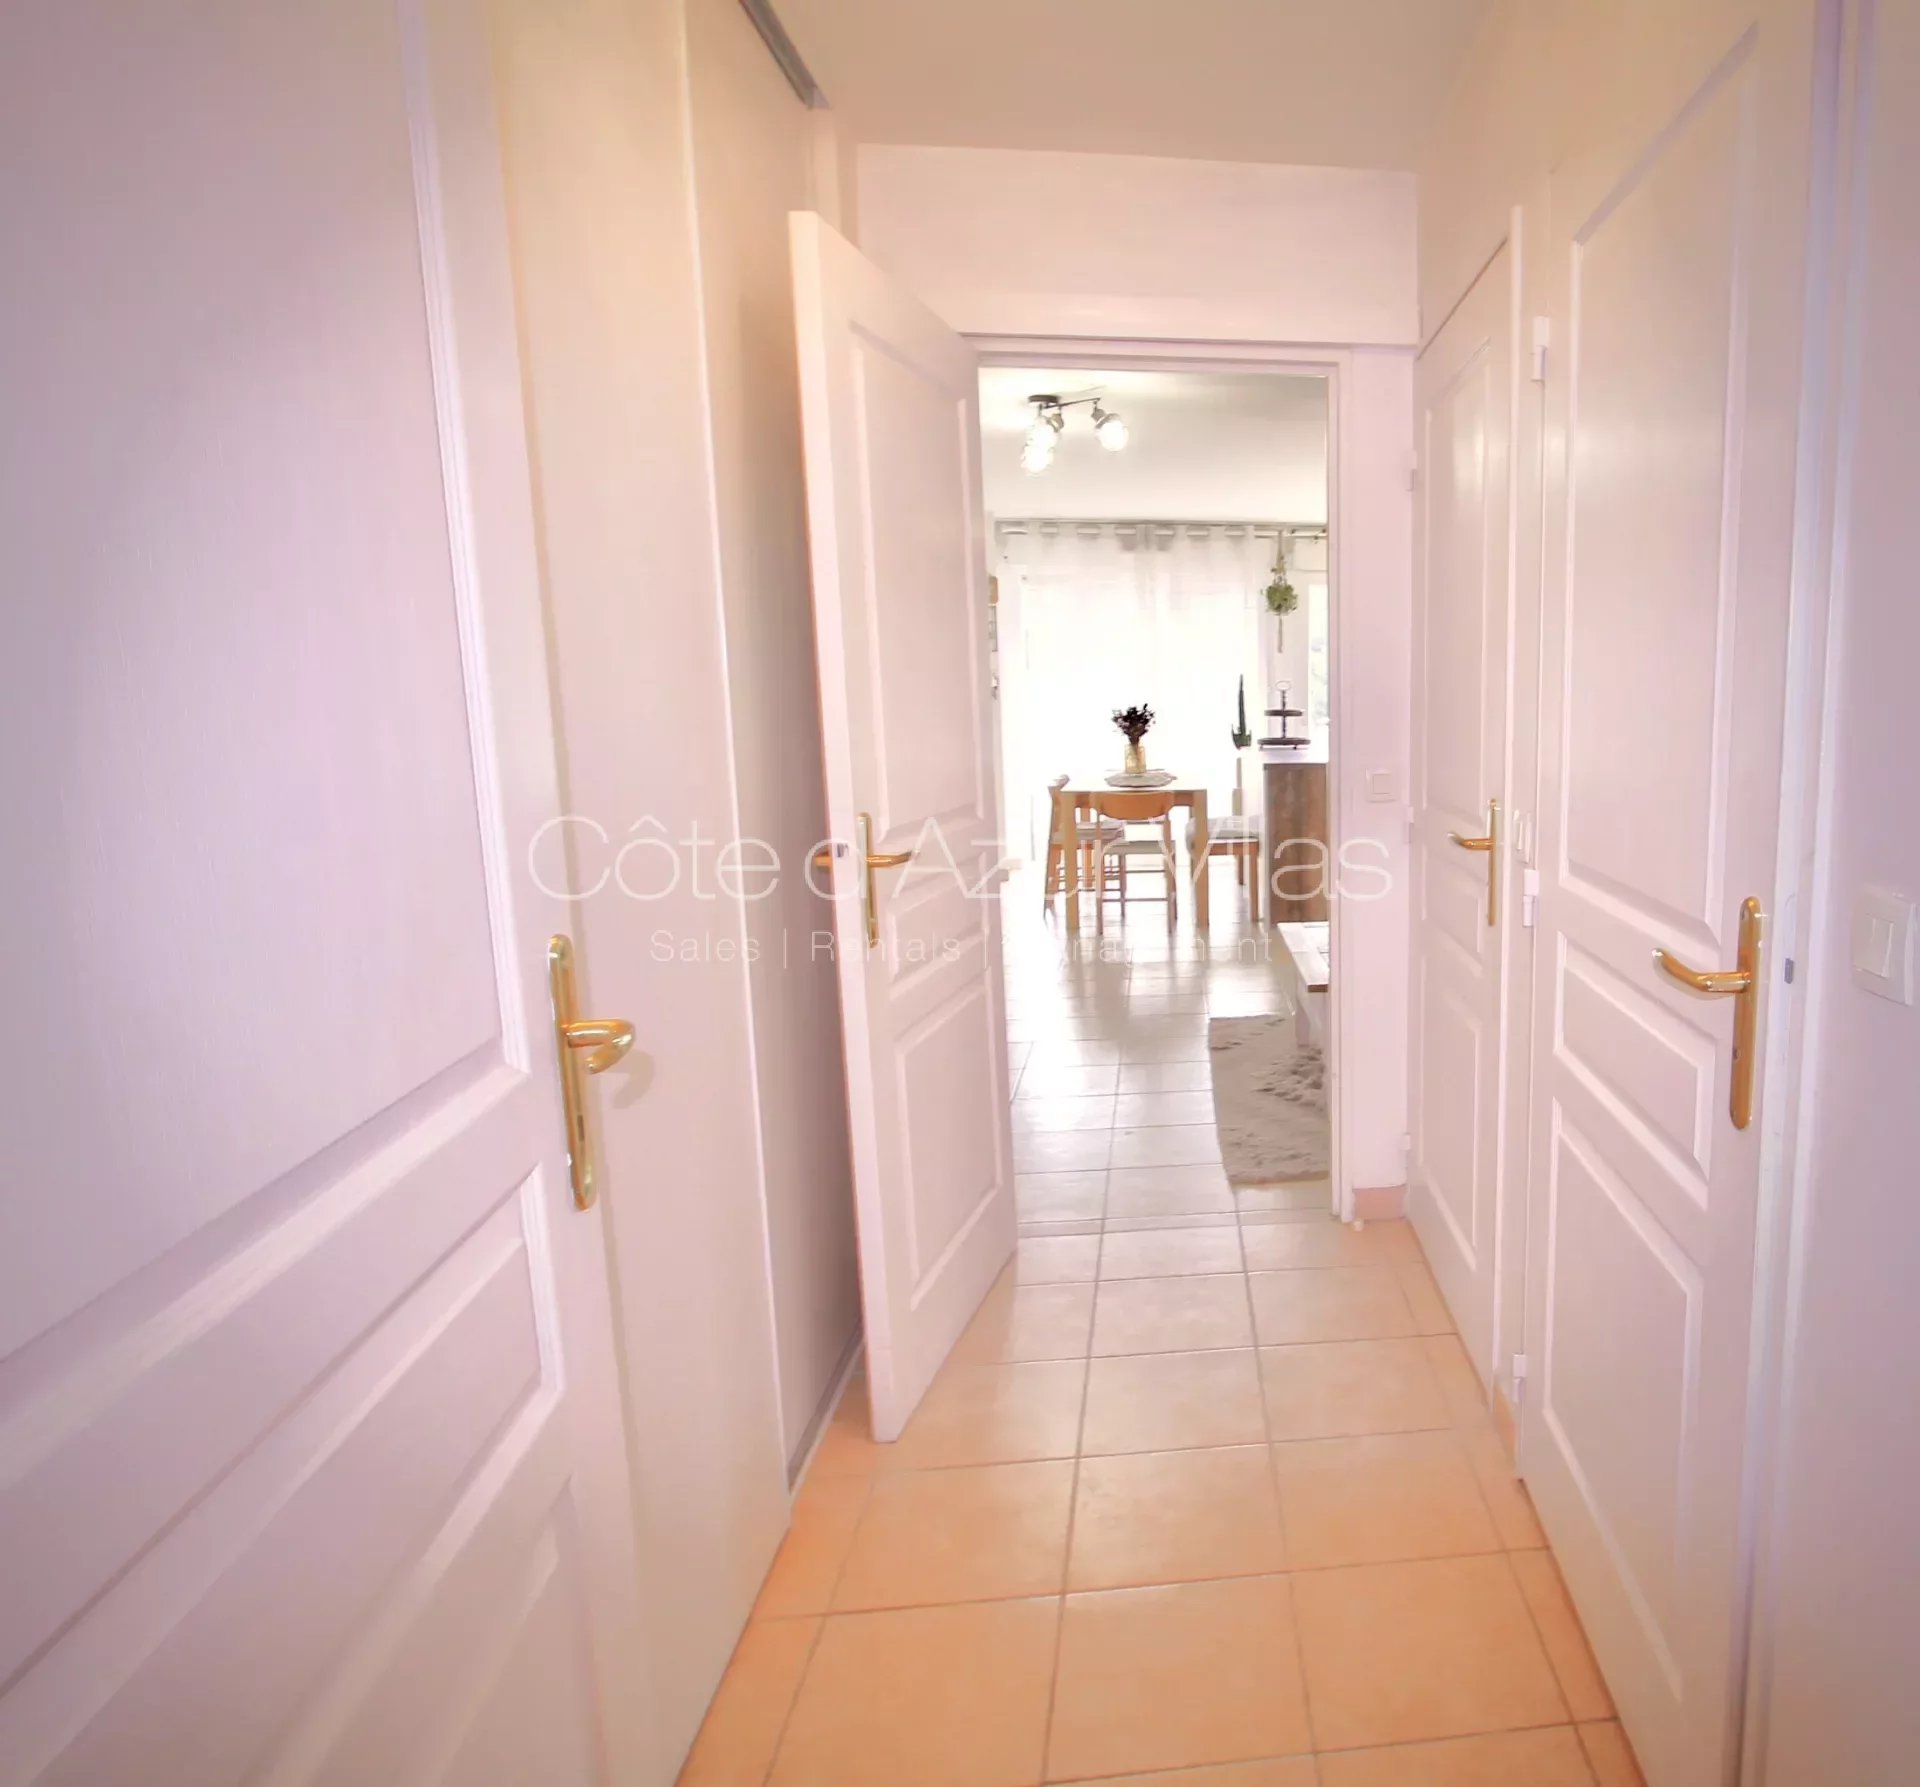 St Laurent du Var - 1 bedroom Apt ideally situated, with 2 terraces